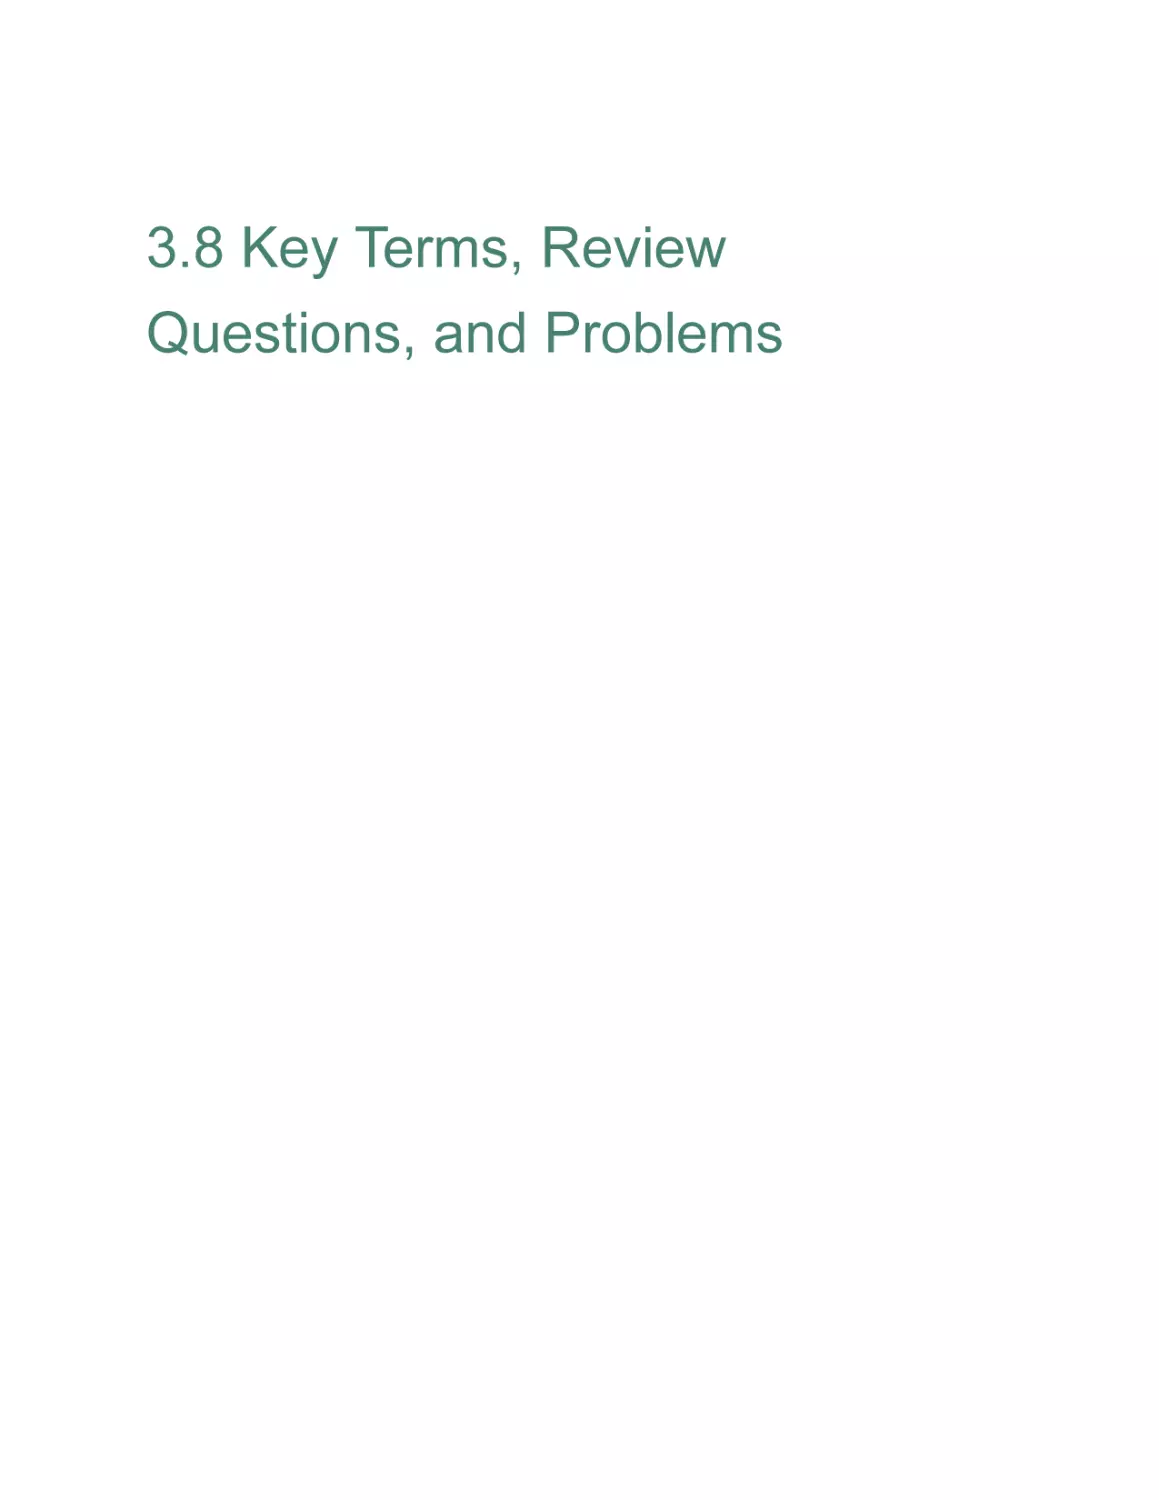 3.8 Key Terms, Review Questions, and Problems